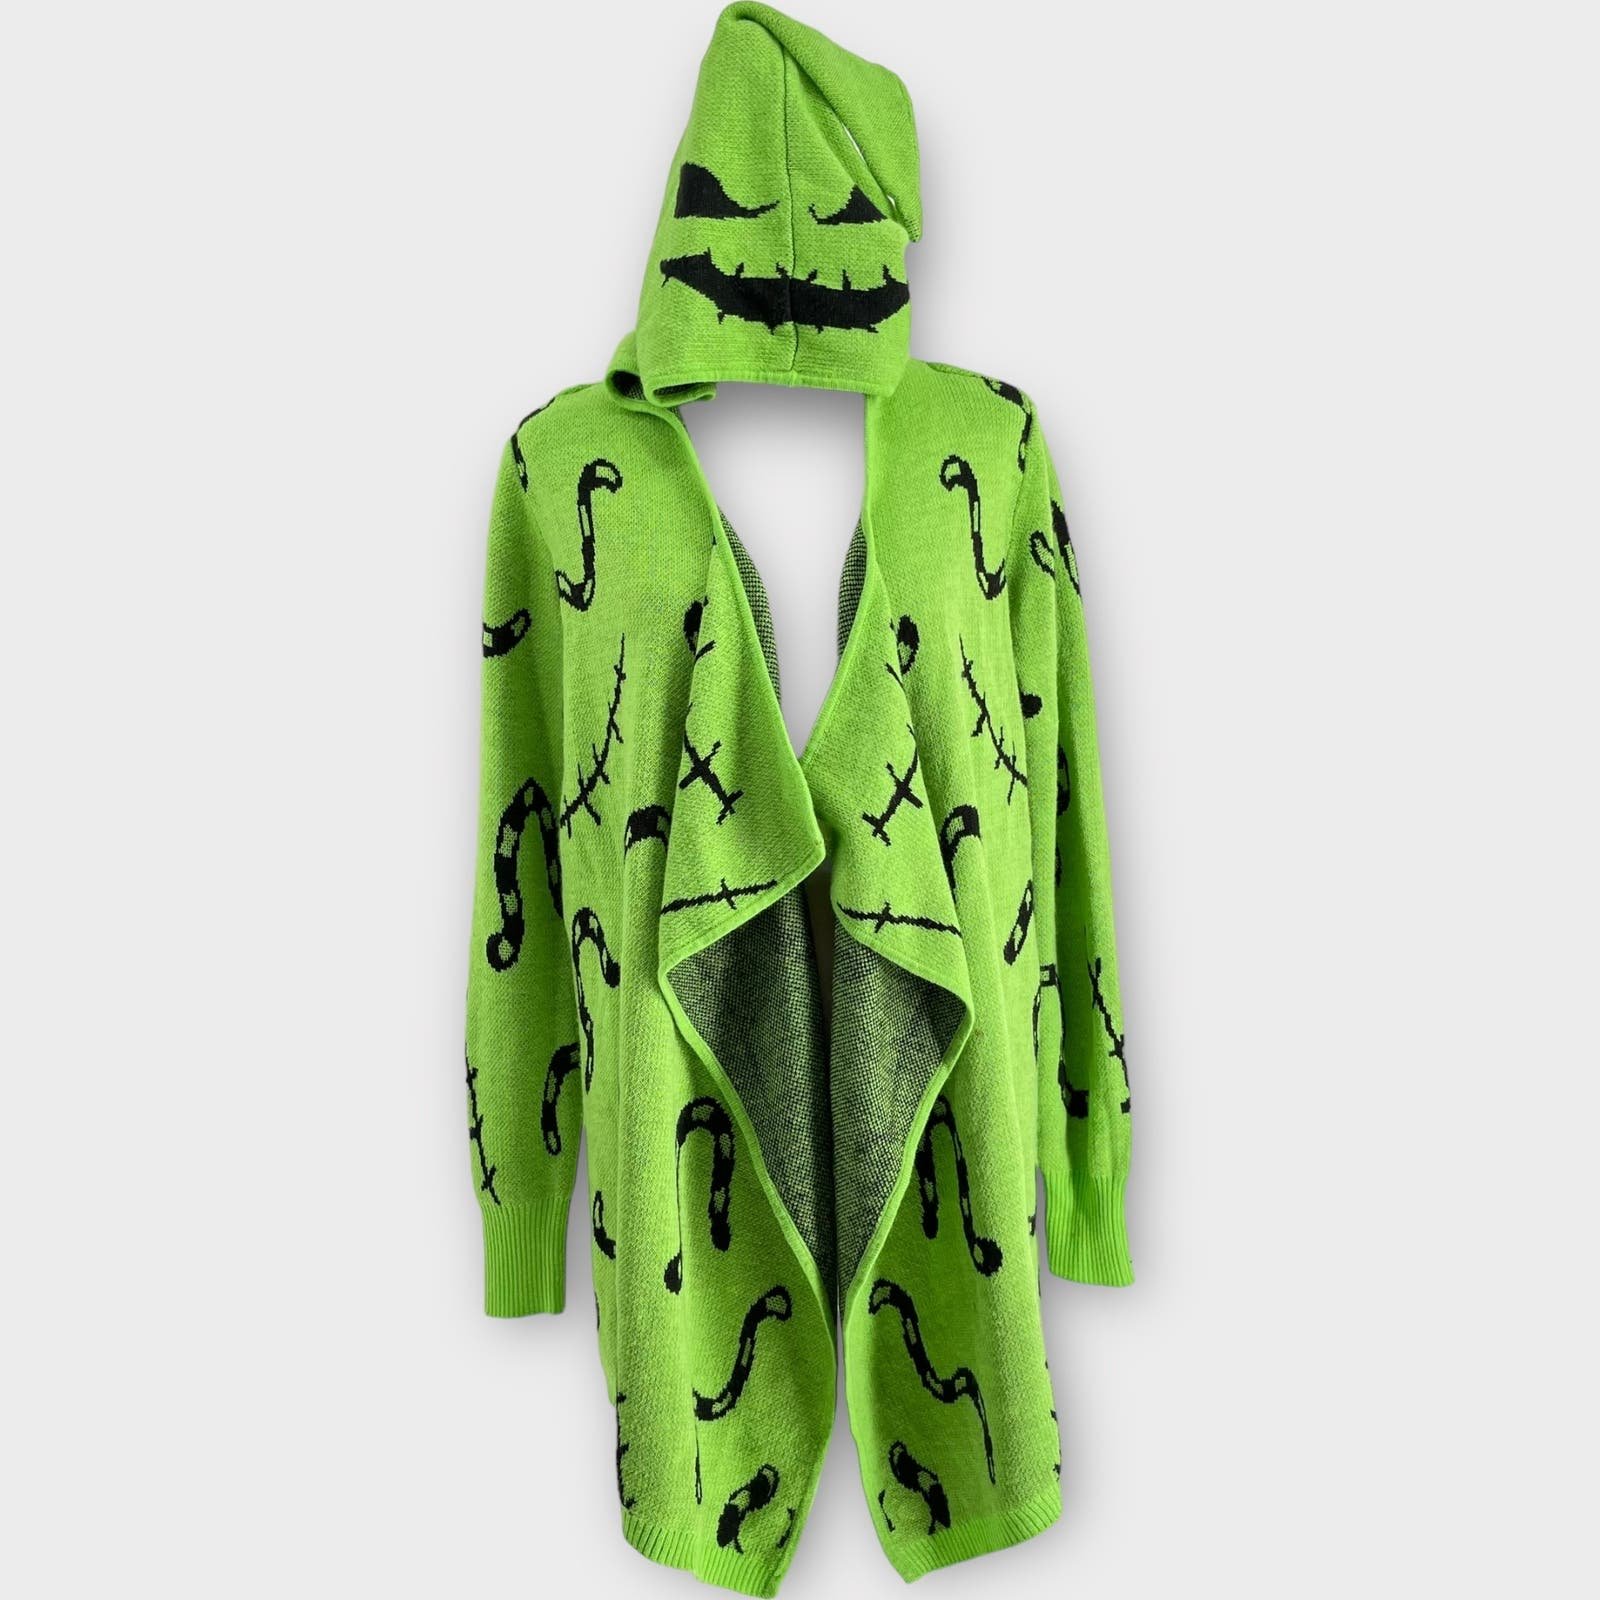 Elegant Disney Her Universe Green Nightmare Before Christmas Oogie Boogie Cardigan Large iuqAWCtem Outlet Store